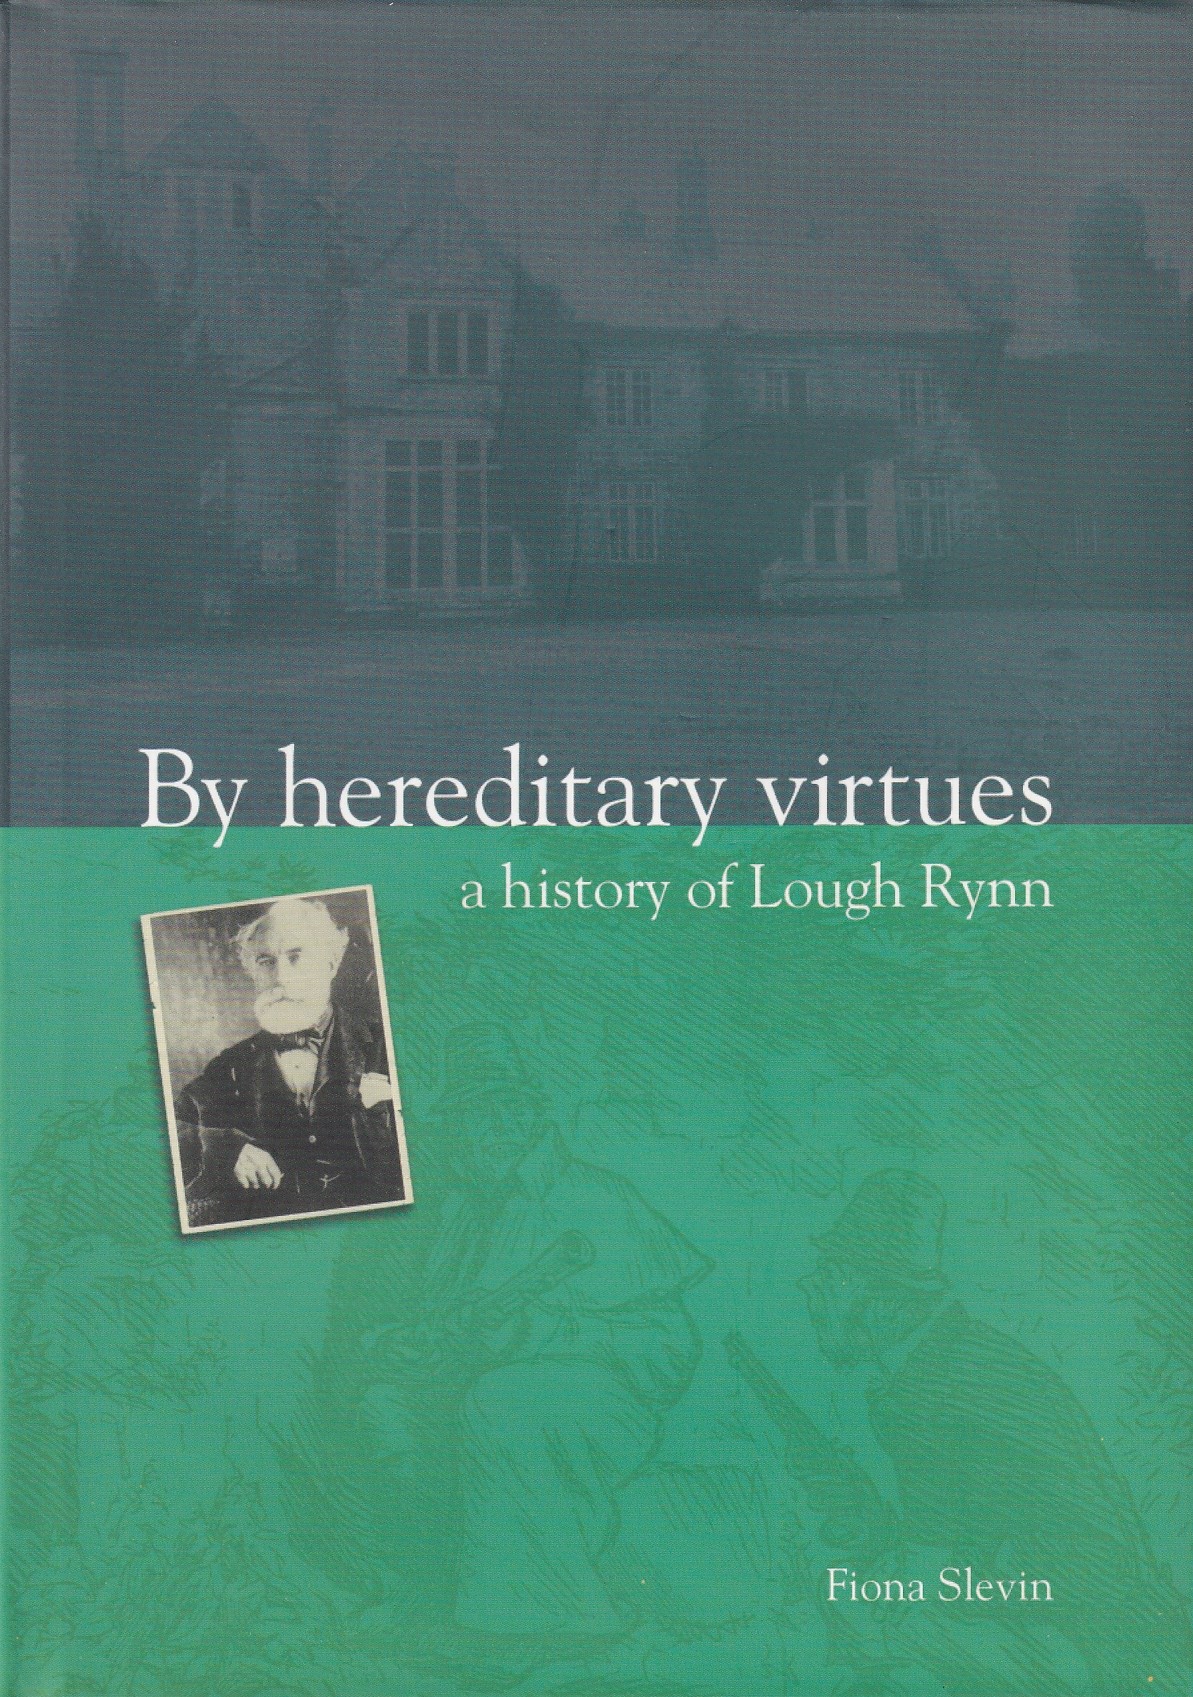 By Hereditary Virtues: A History of Lough Rynn | Fiona Slevin | Charlie Byrne's